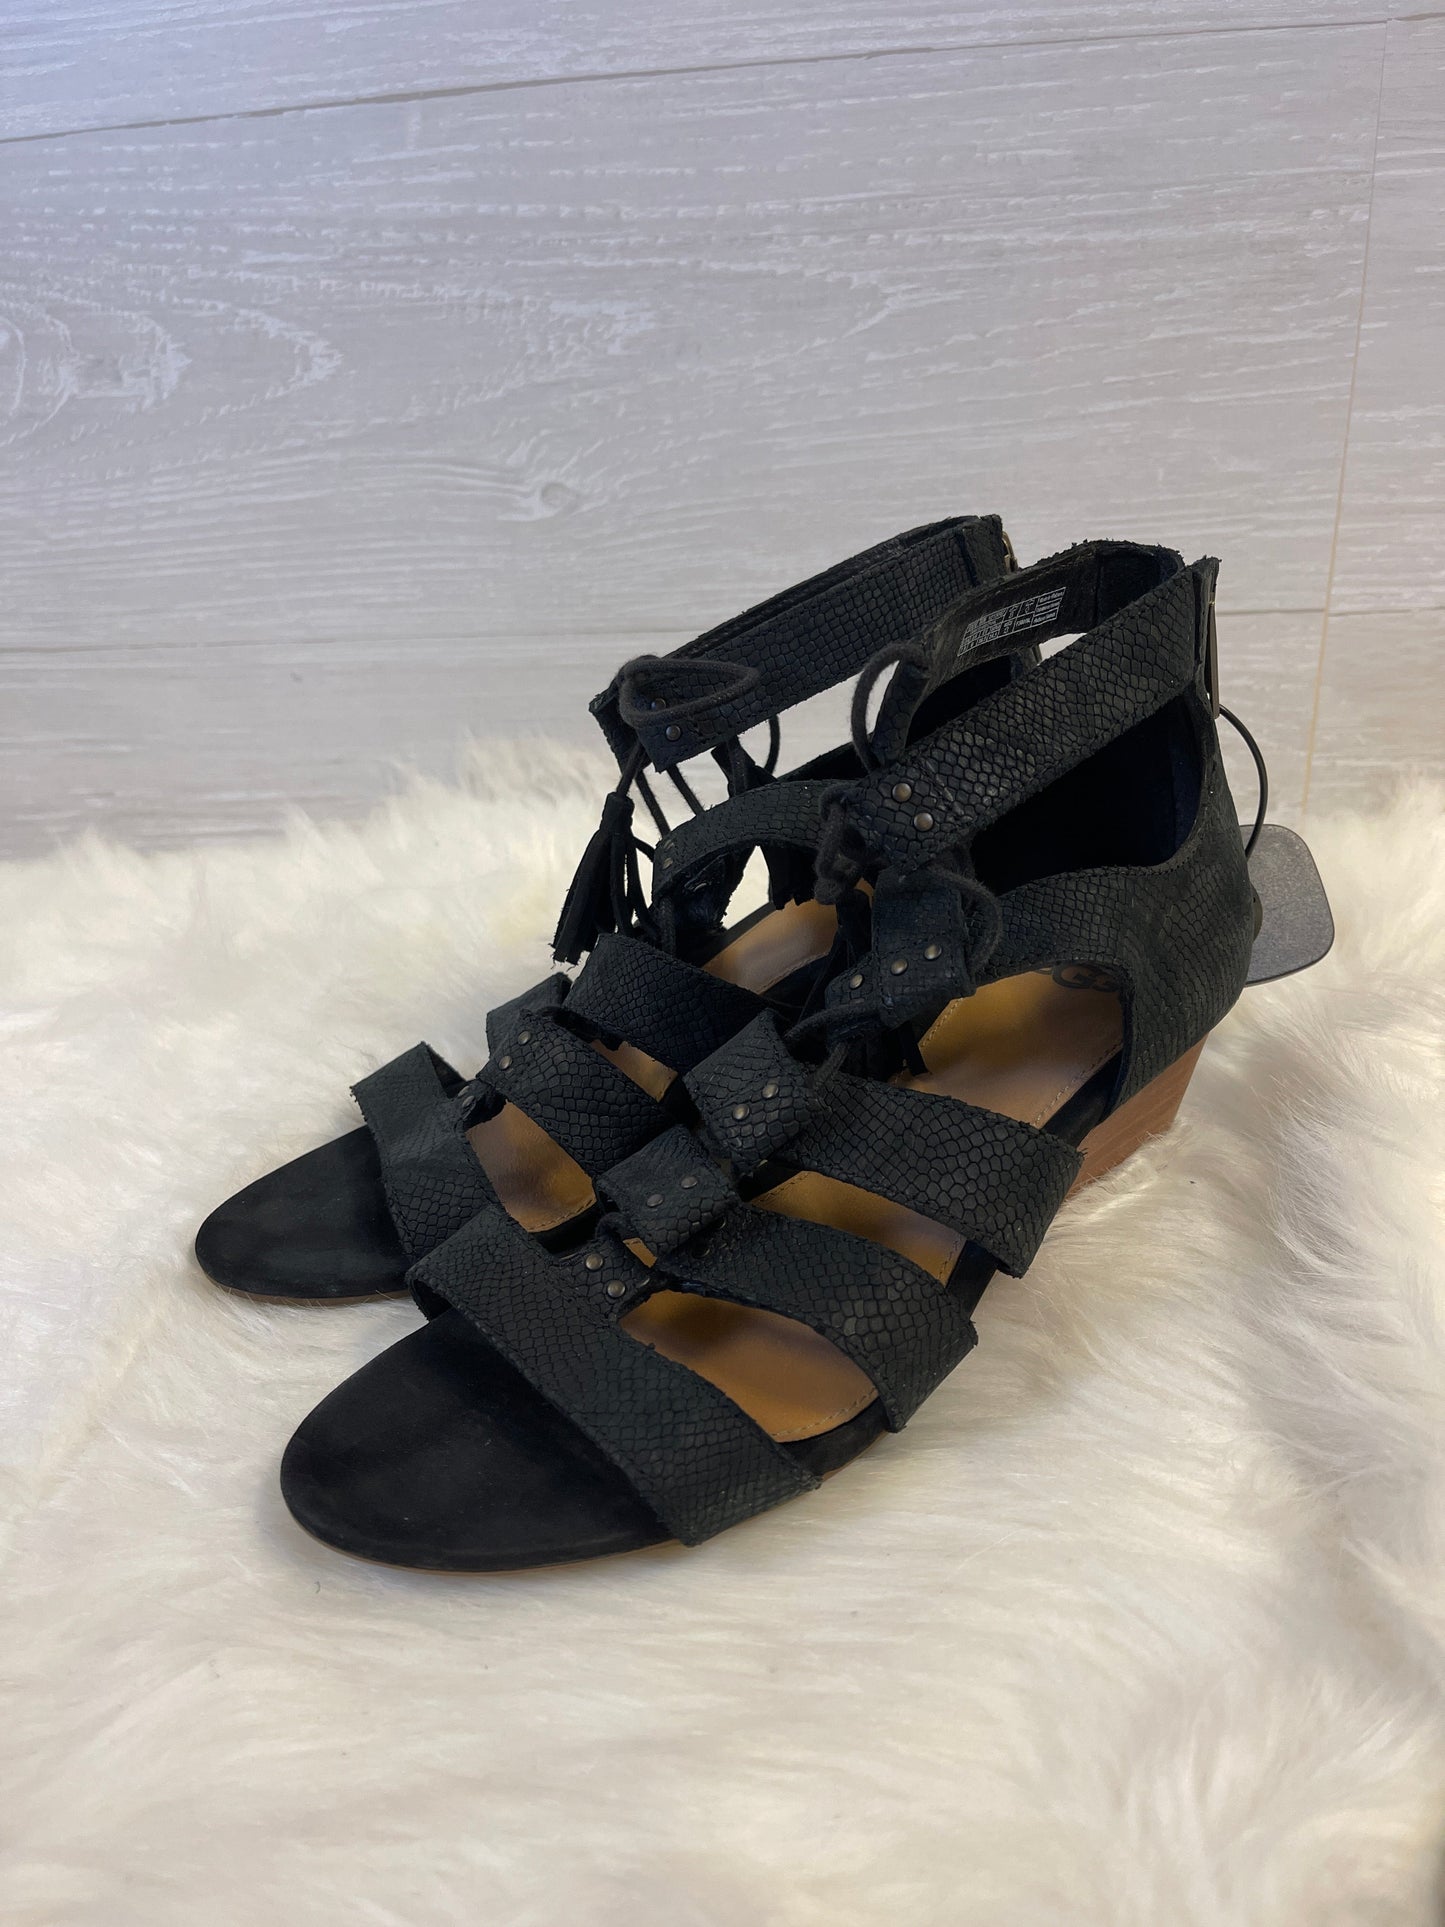 Sandals Heels Wedge By Ugg  Size: 7.5